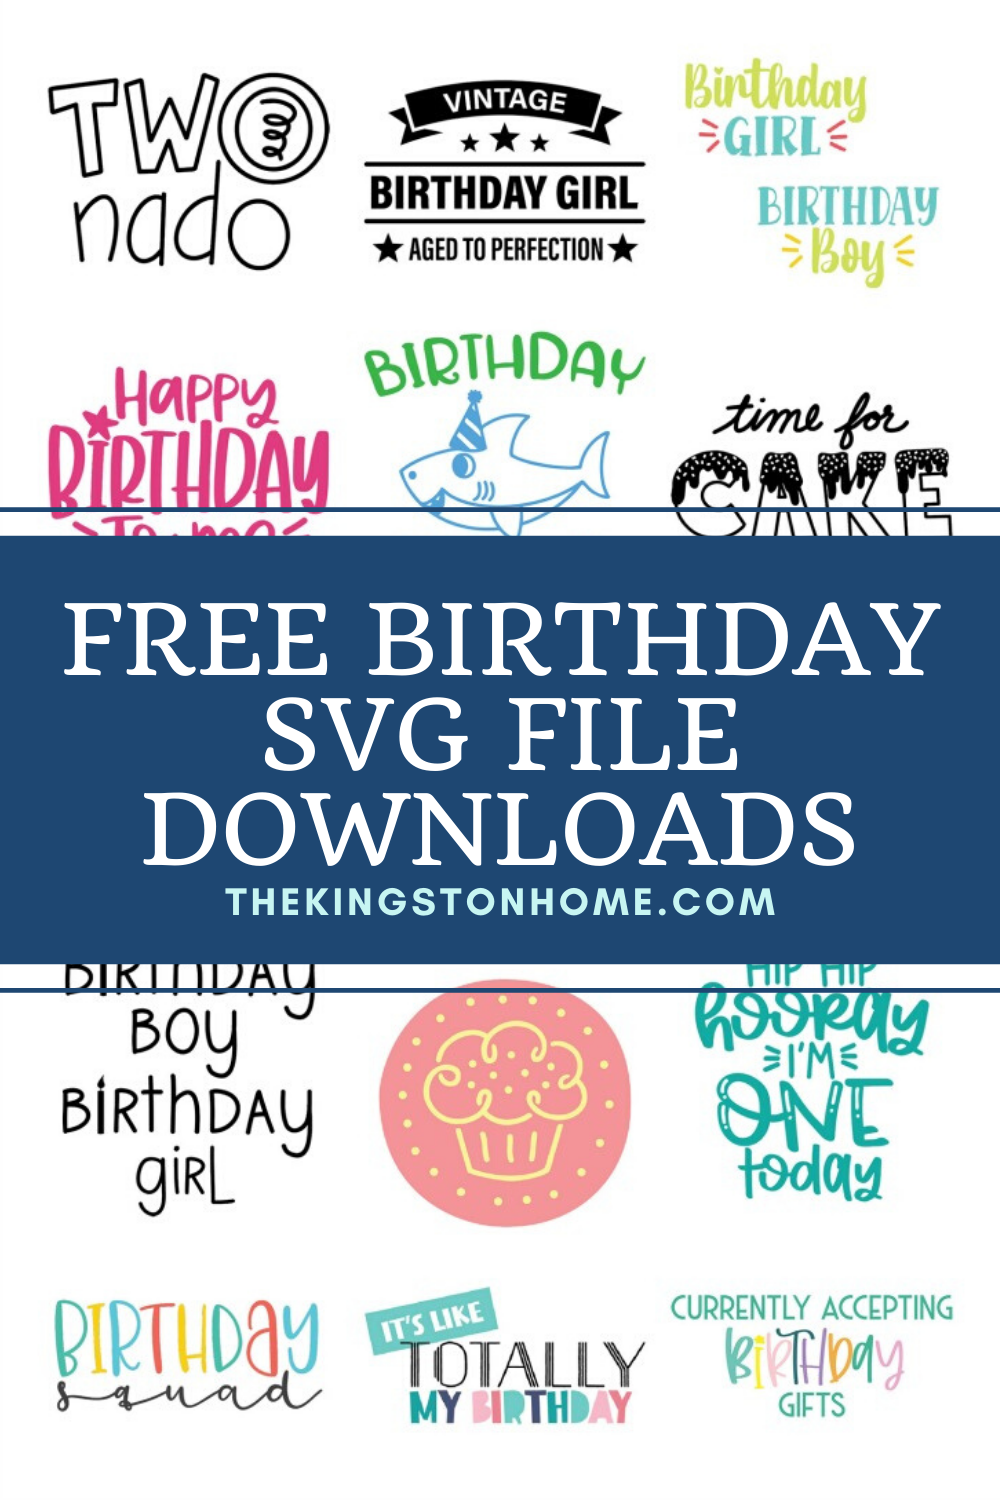 Free Birthday SVG Files - The Kingston Home: Whether it's your birthday, your child's, or your best friend's, celebrate it in style with our 15 FREE Birthday SVG files! via @craftykingstons